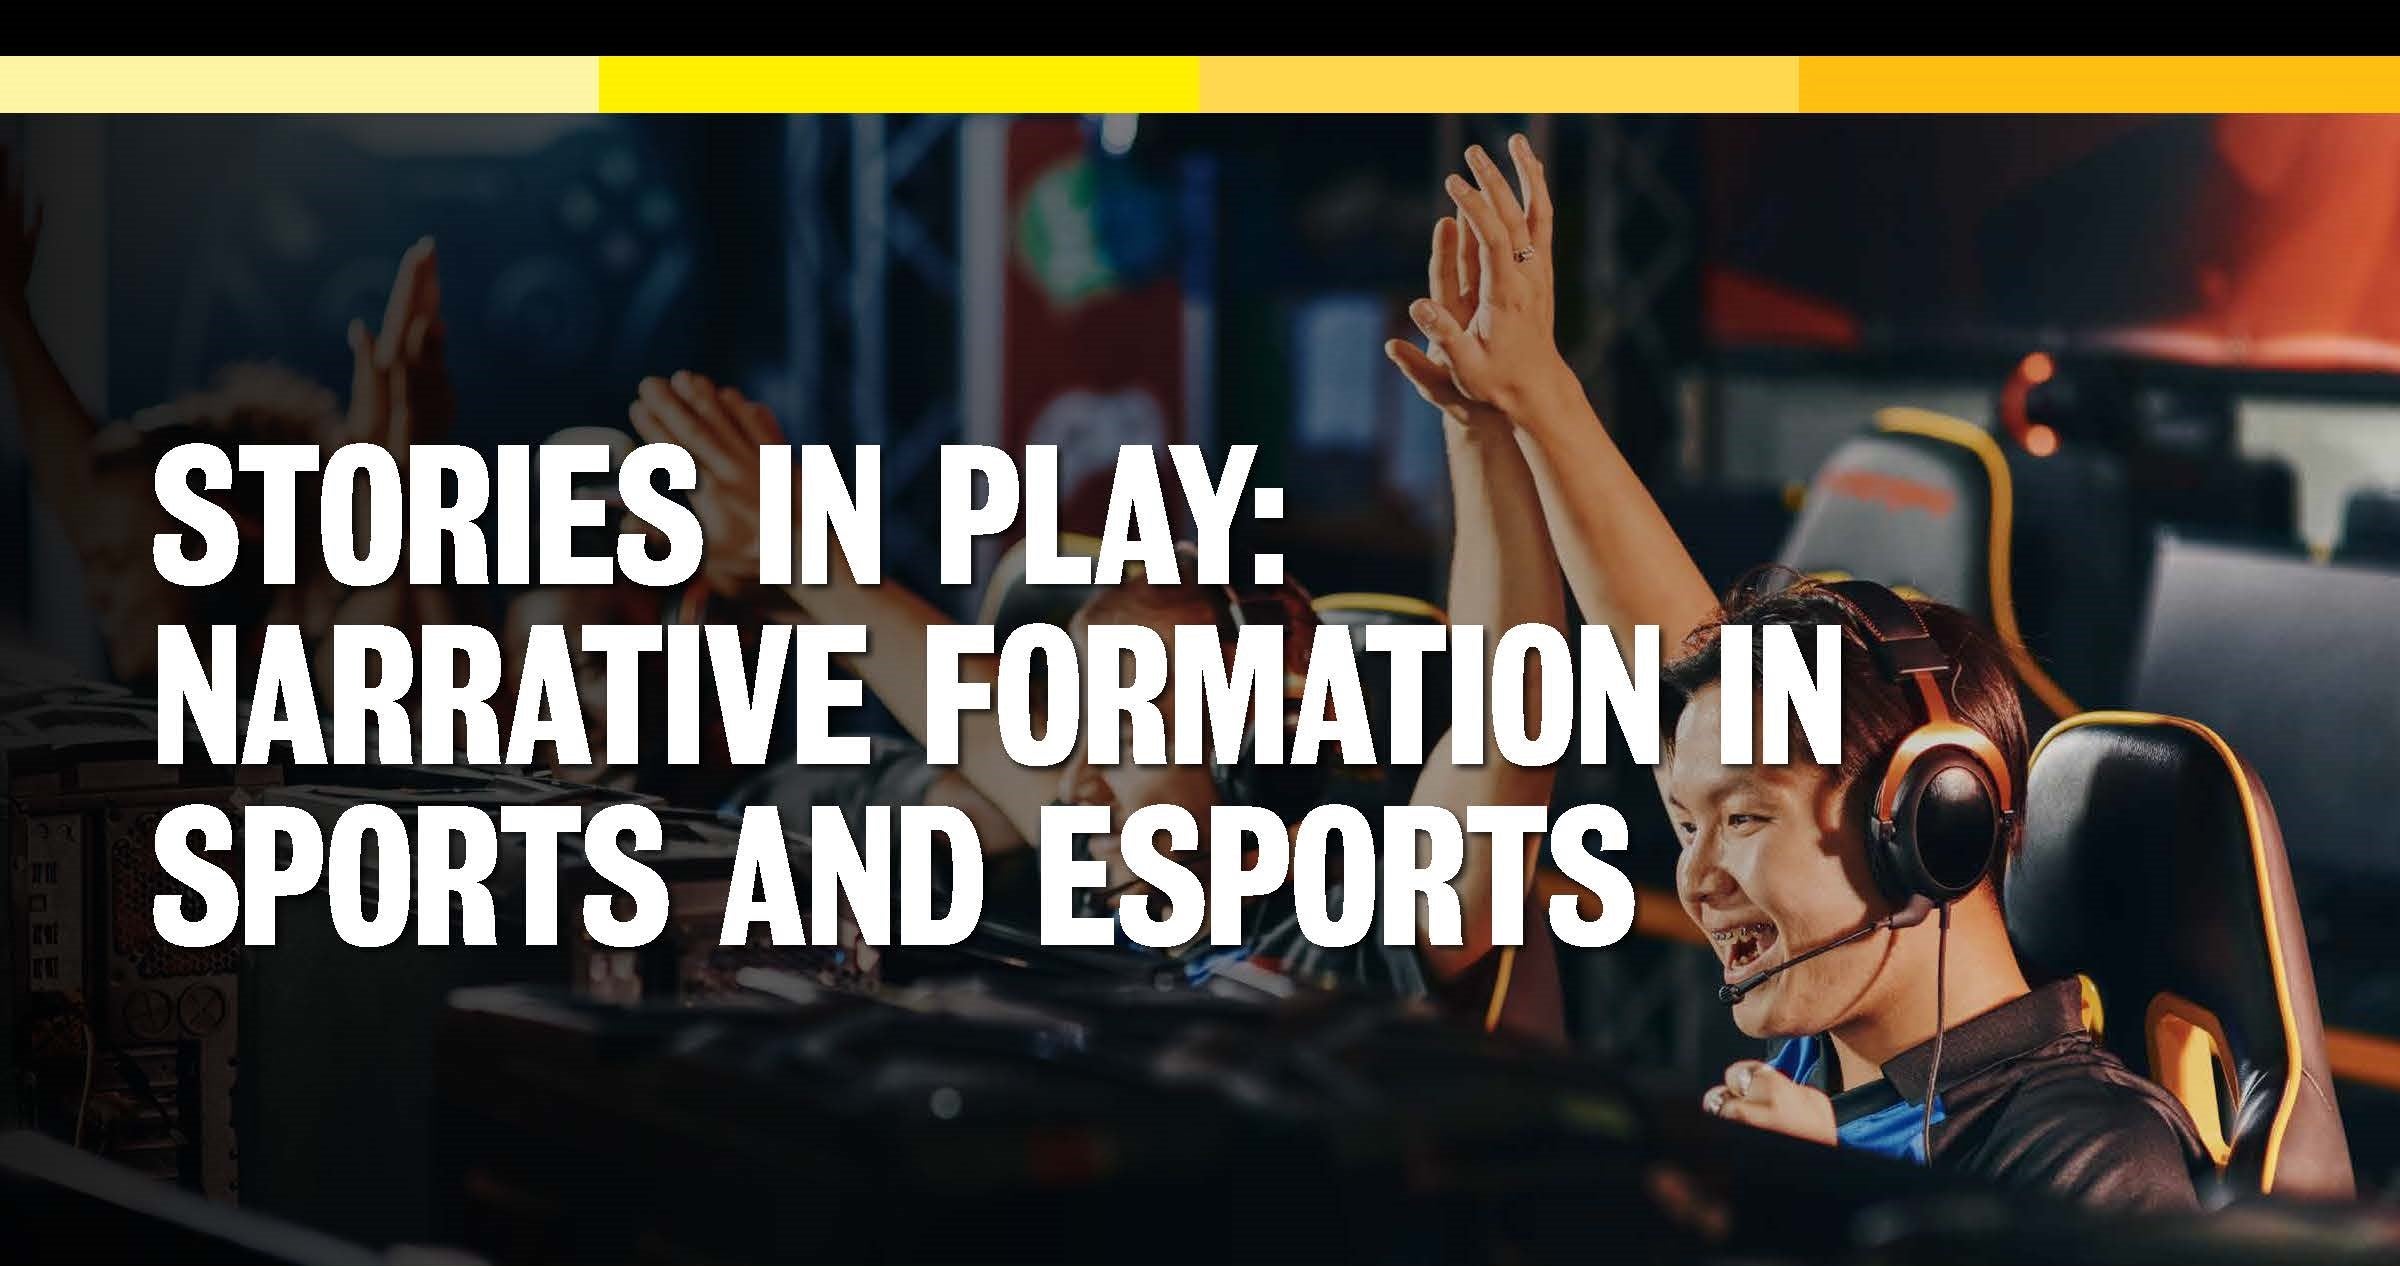 Stories in Narrative Formation in Sports and Esports poster title with two gamers high-fiving in the background